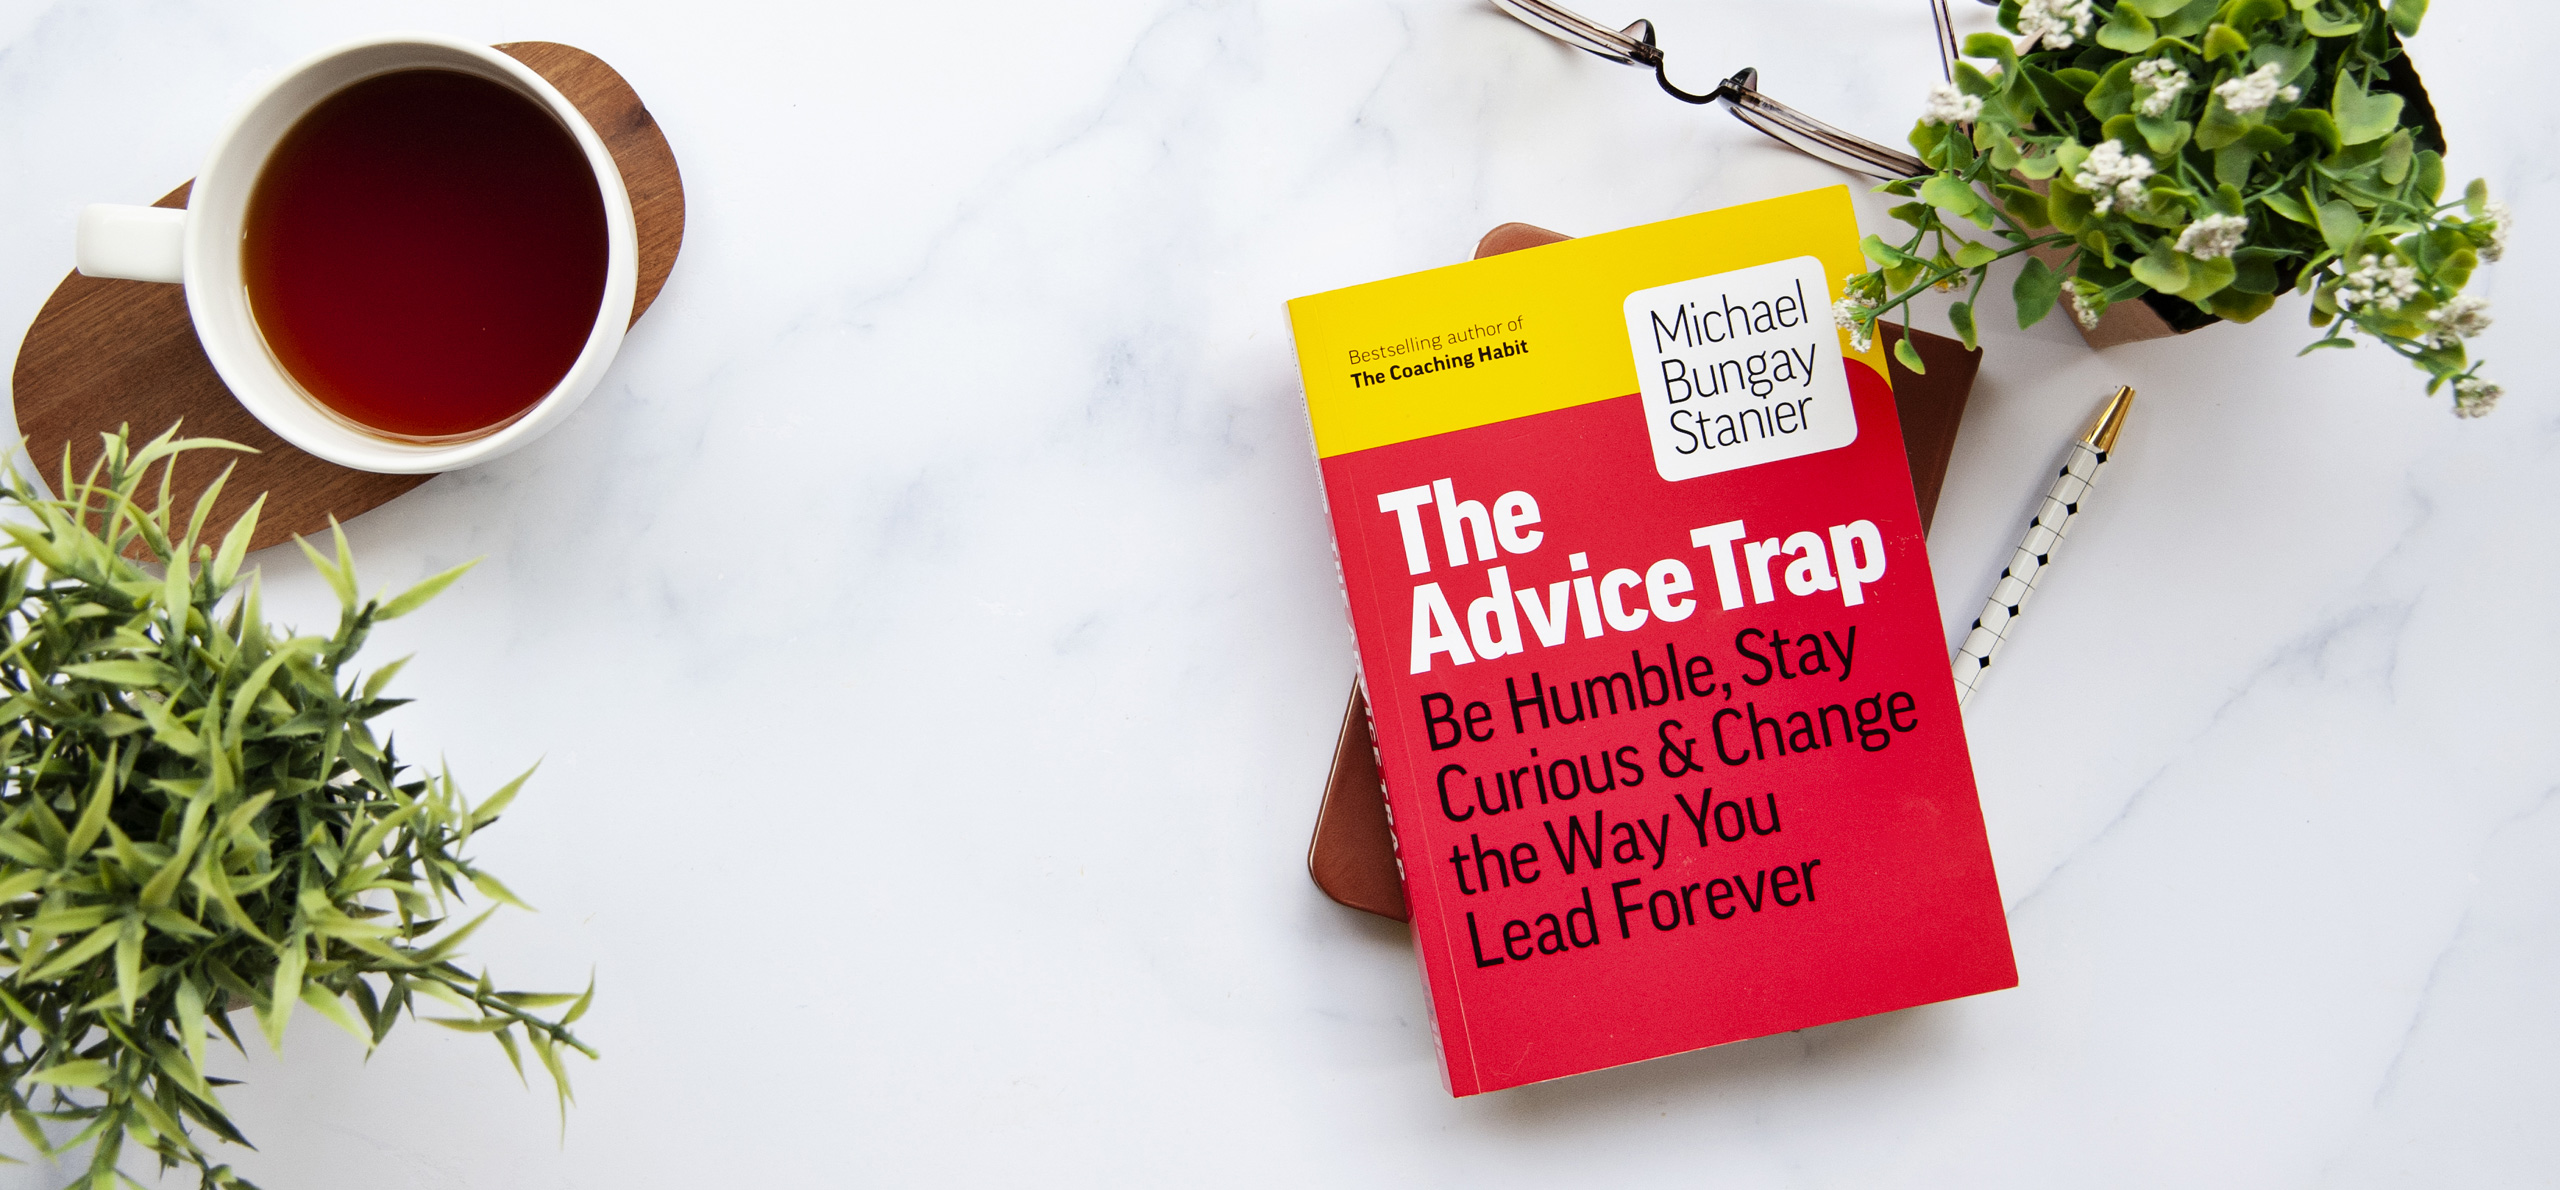 Insights from 'The Advice Trap' by Michael Bungay Stanier